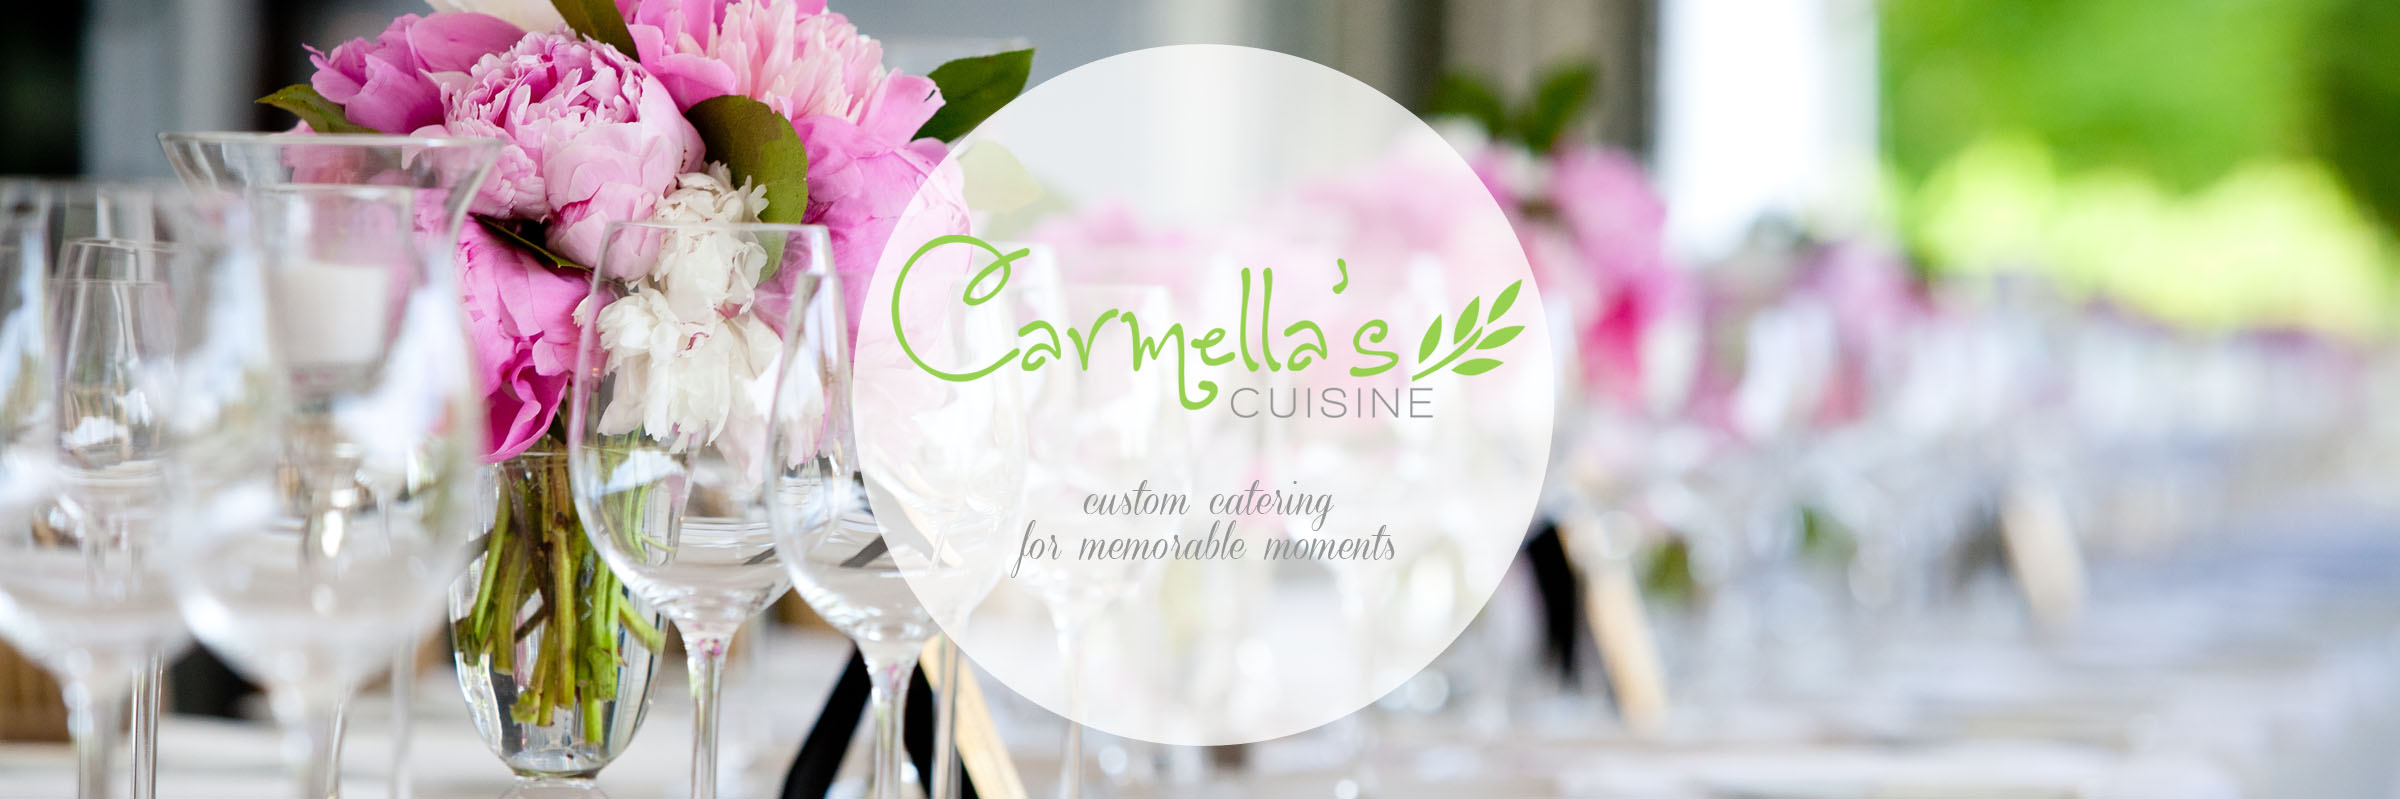 Welcome to Carmella's Cuisine